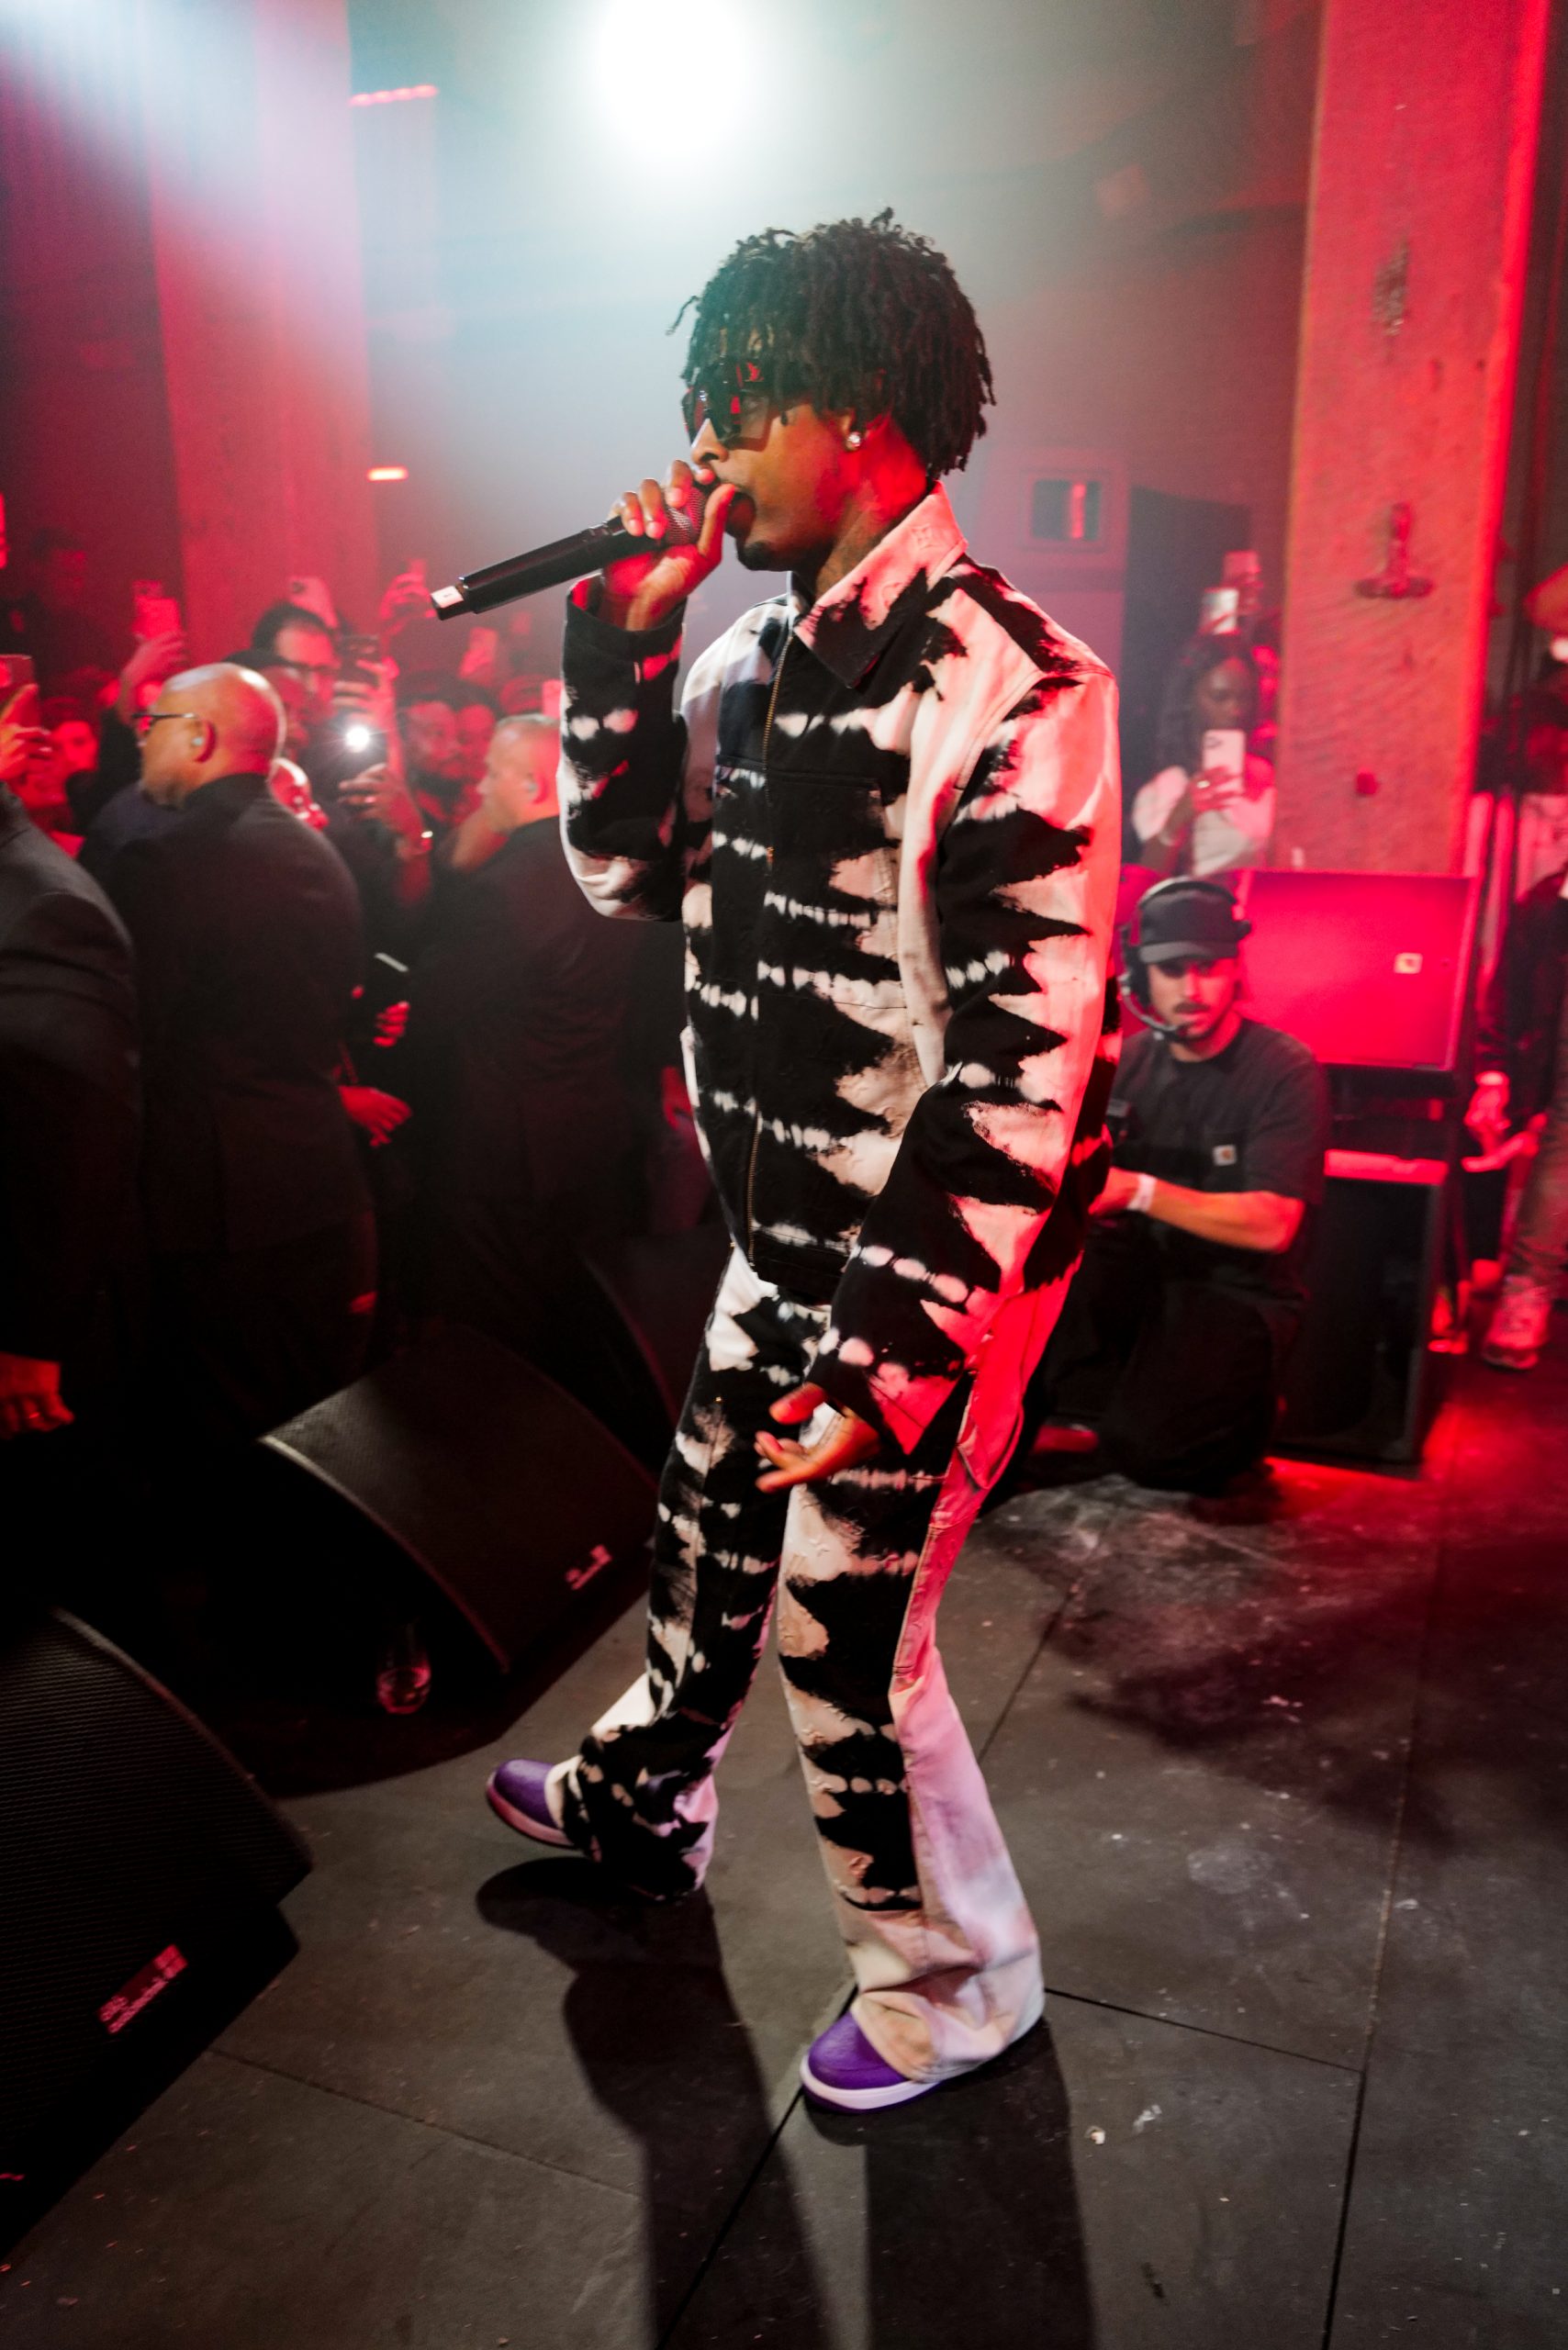 21 savage just made his modelling debut in virgil abloh's off-white